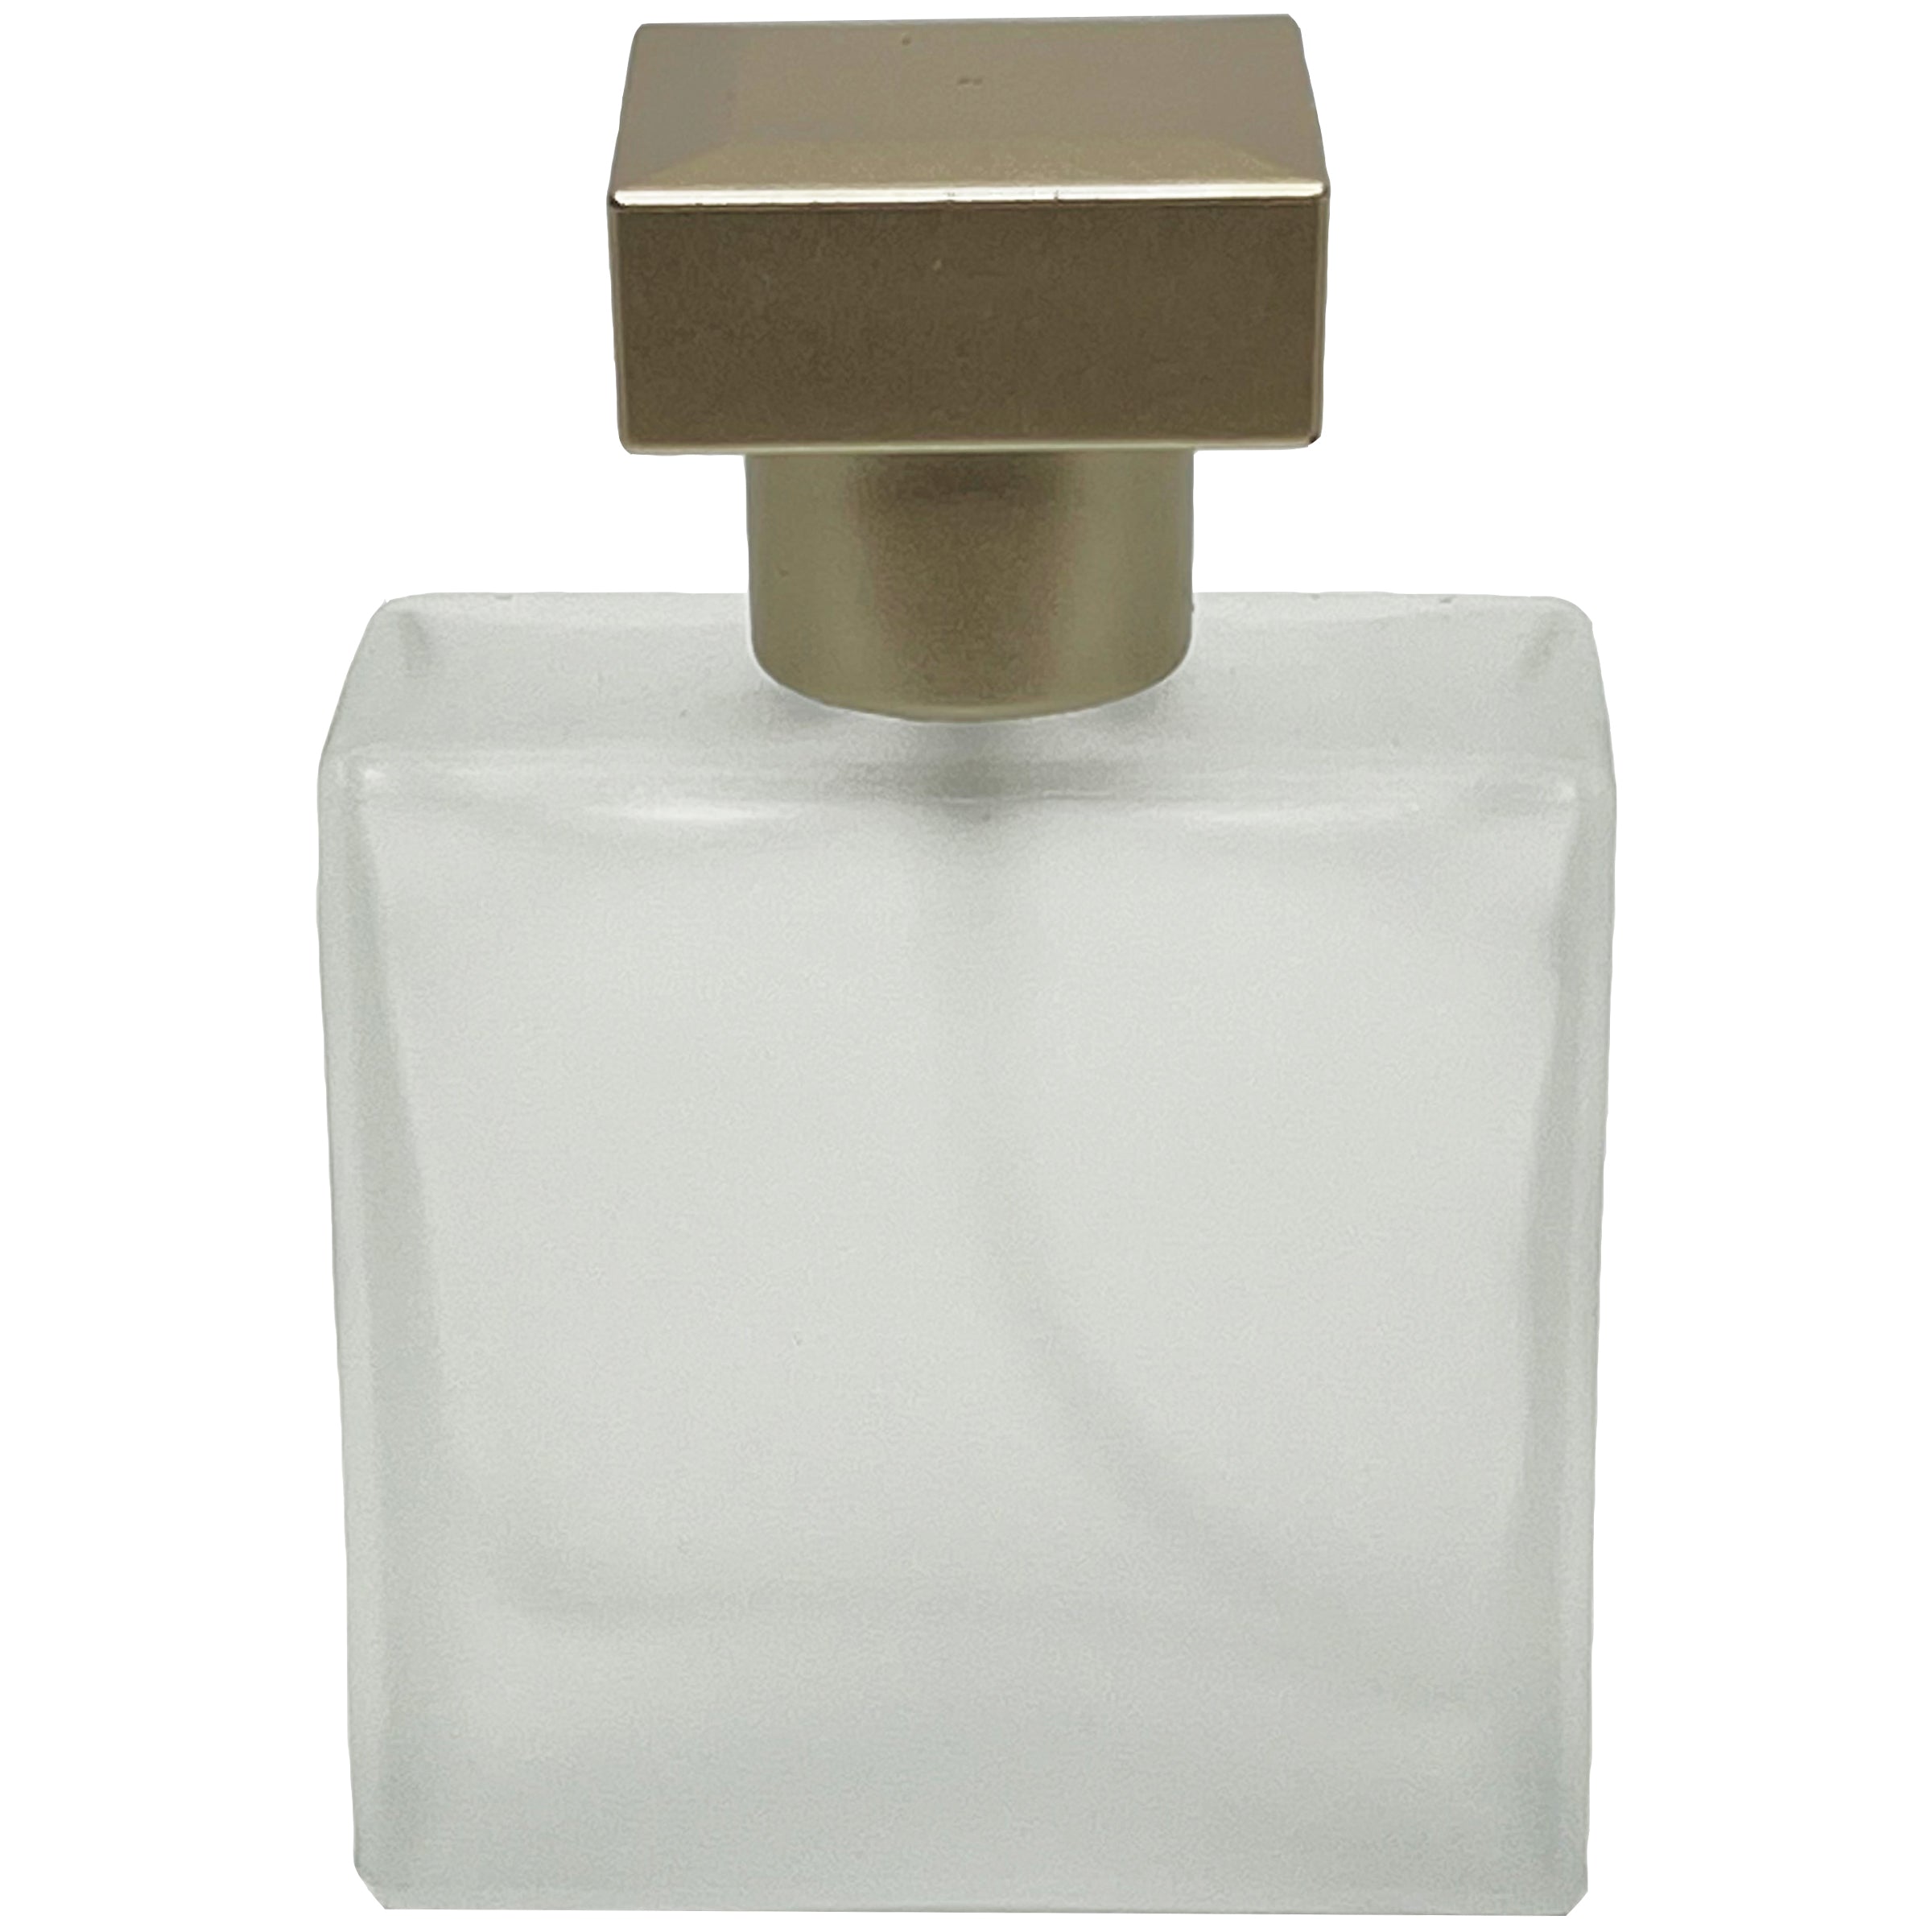 25ml 0.85oz Perfume Frosted Glass Square Spray Bottles Gold Atomizers